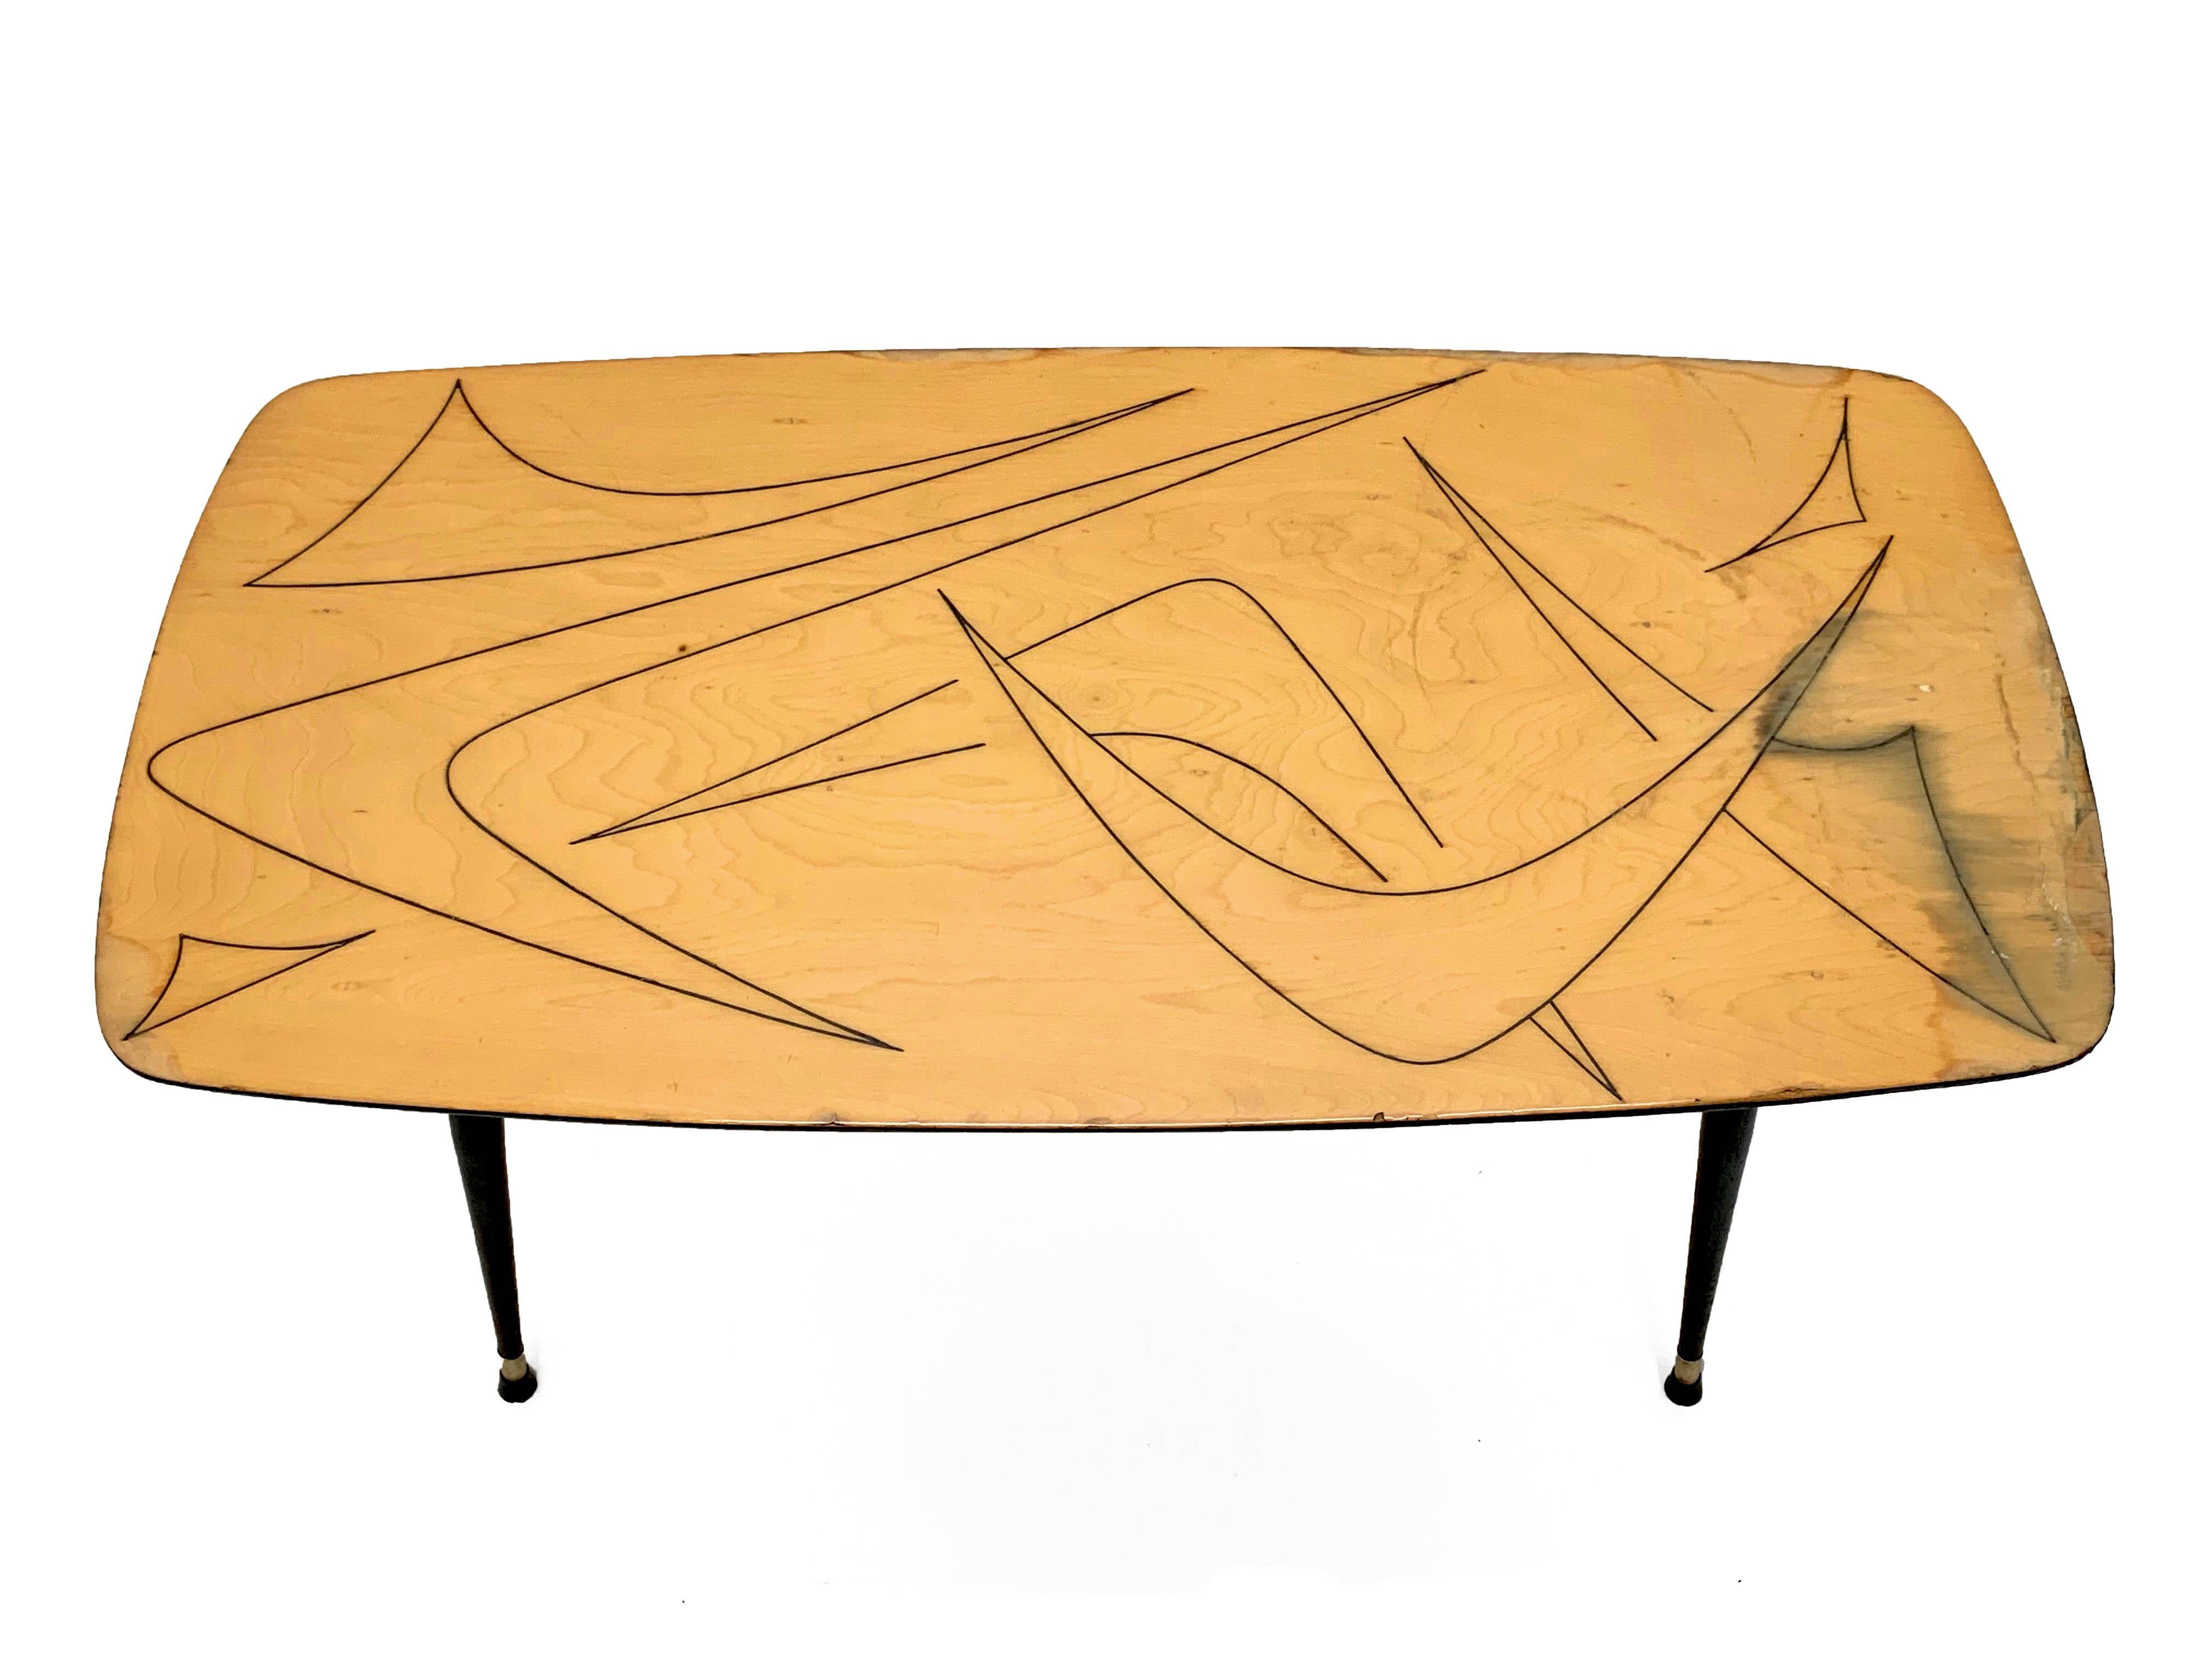 Midcentury Italian Painted Wood, Brass and Black Metal Coffee Table, 1950s For Sale 12